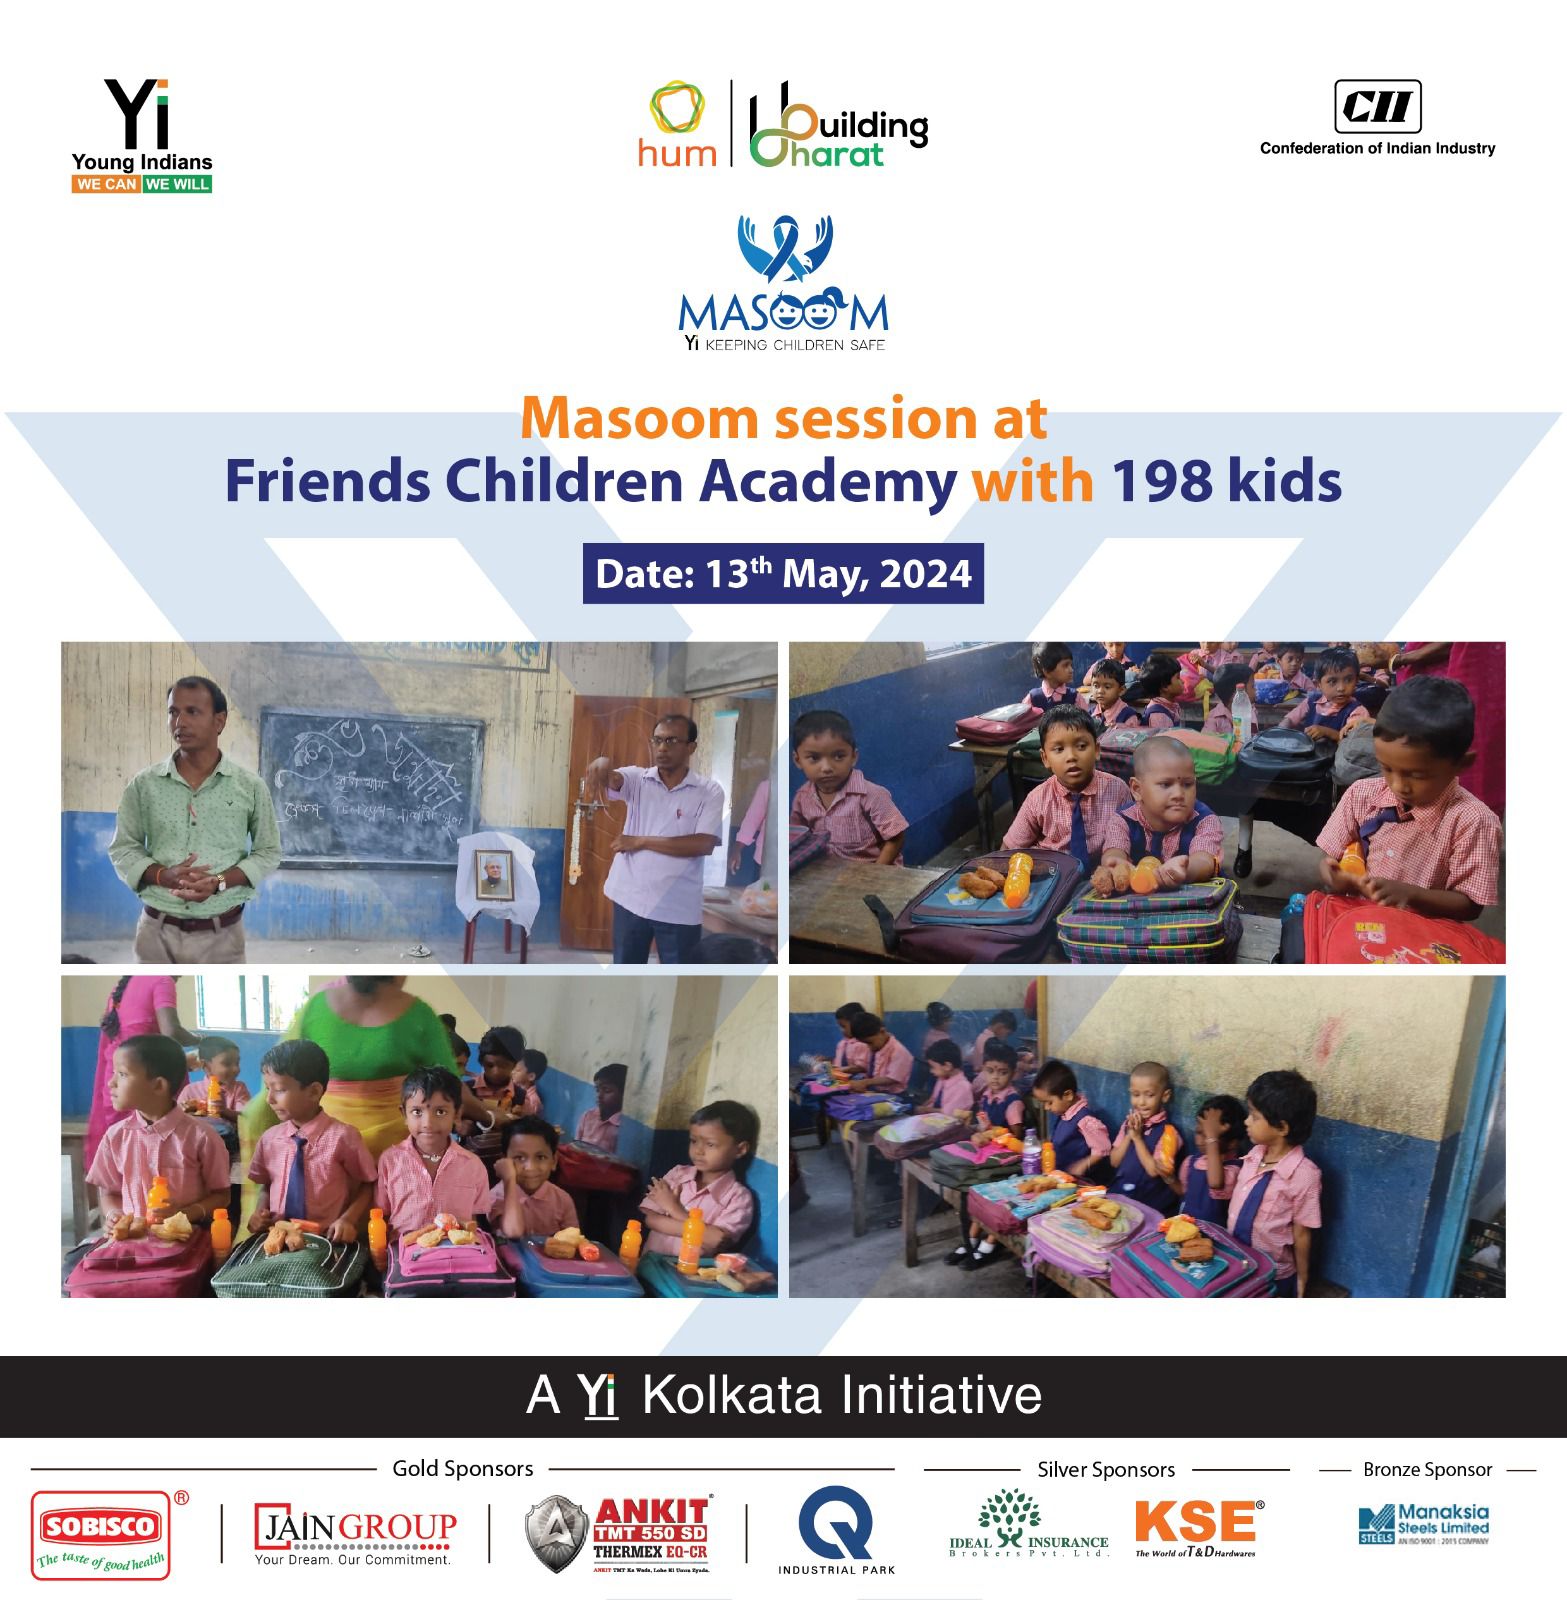 Yi24 | Masoom - Awareness Session at Friends Children Academy with 198 Students